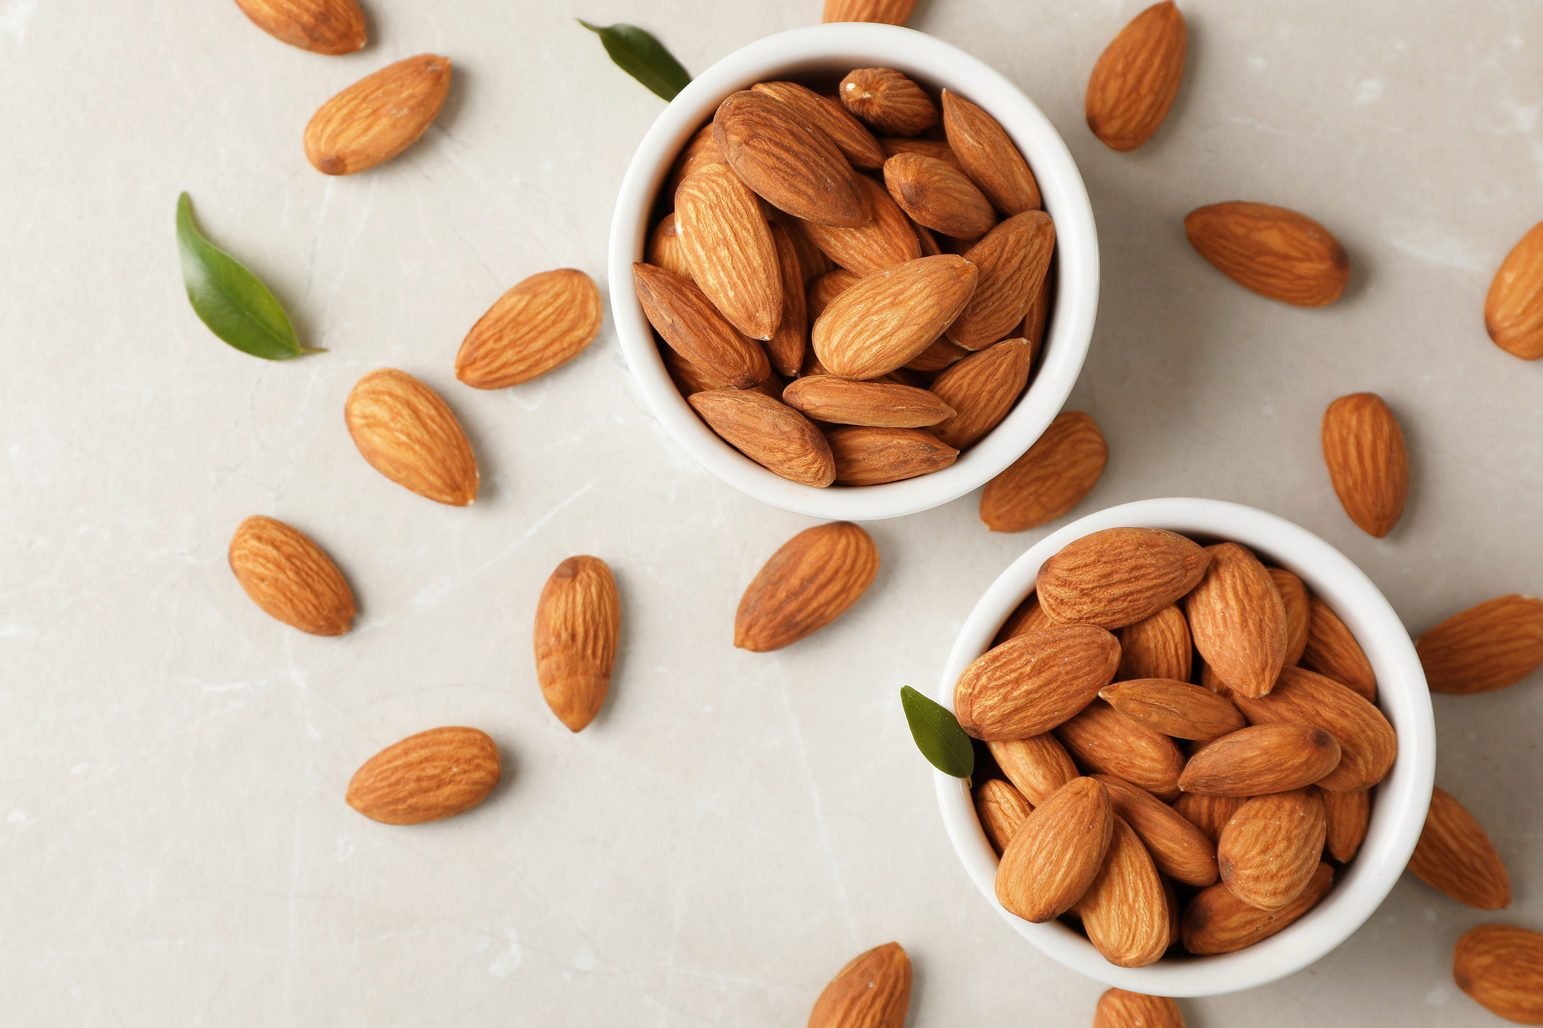 Eating almonds may lower your risk for heart disease | The Healthy